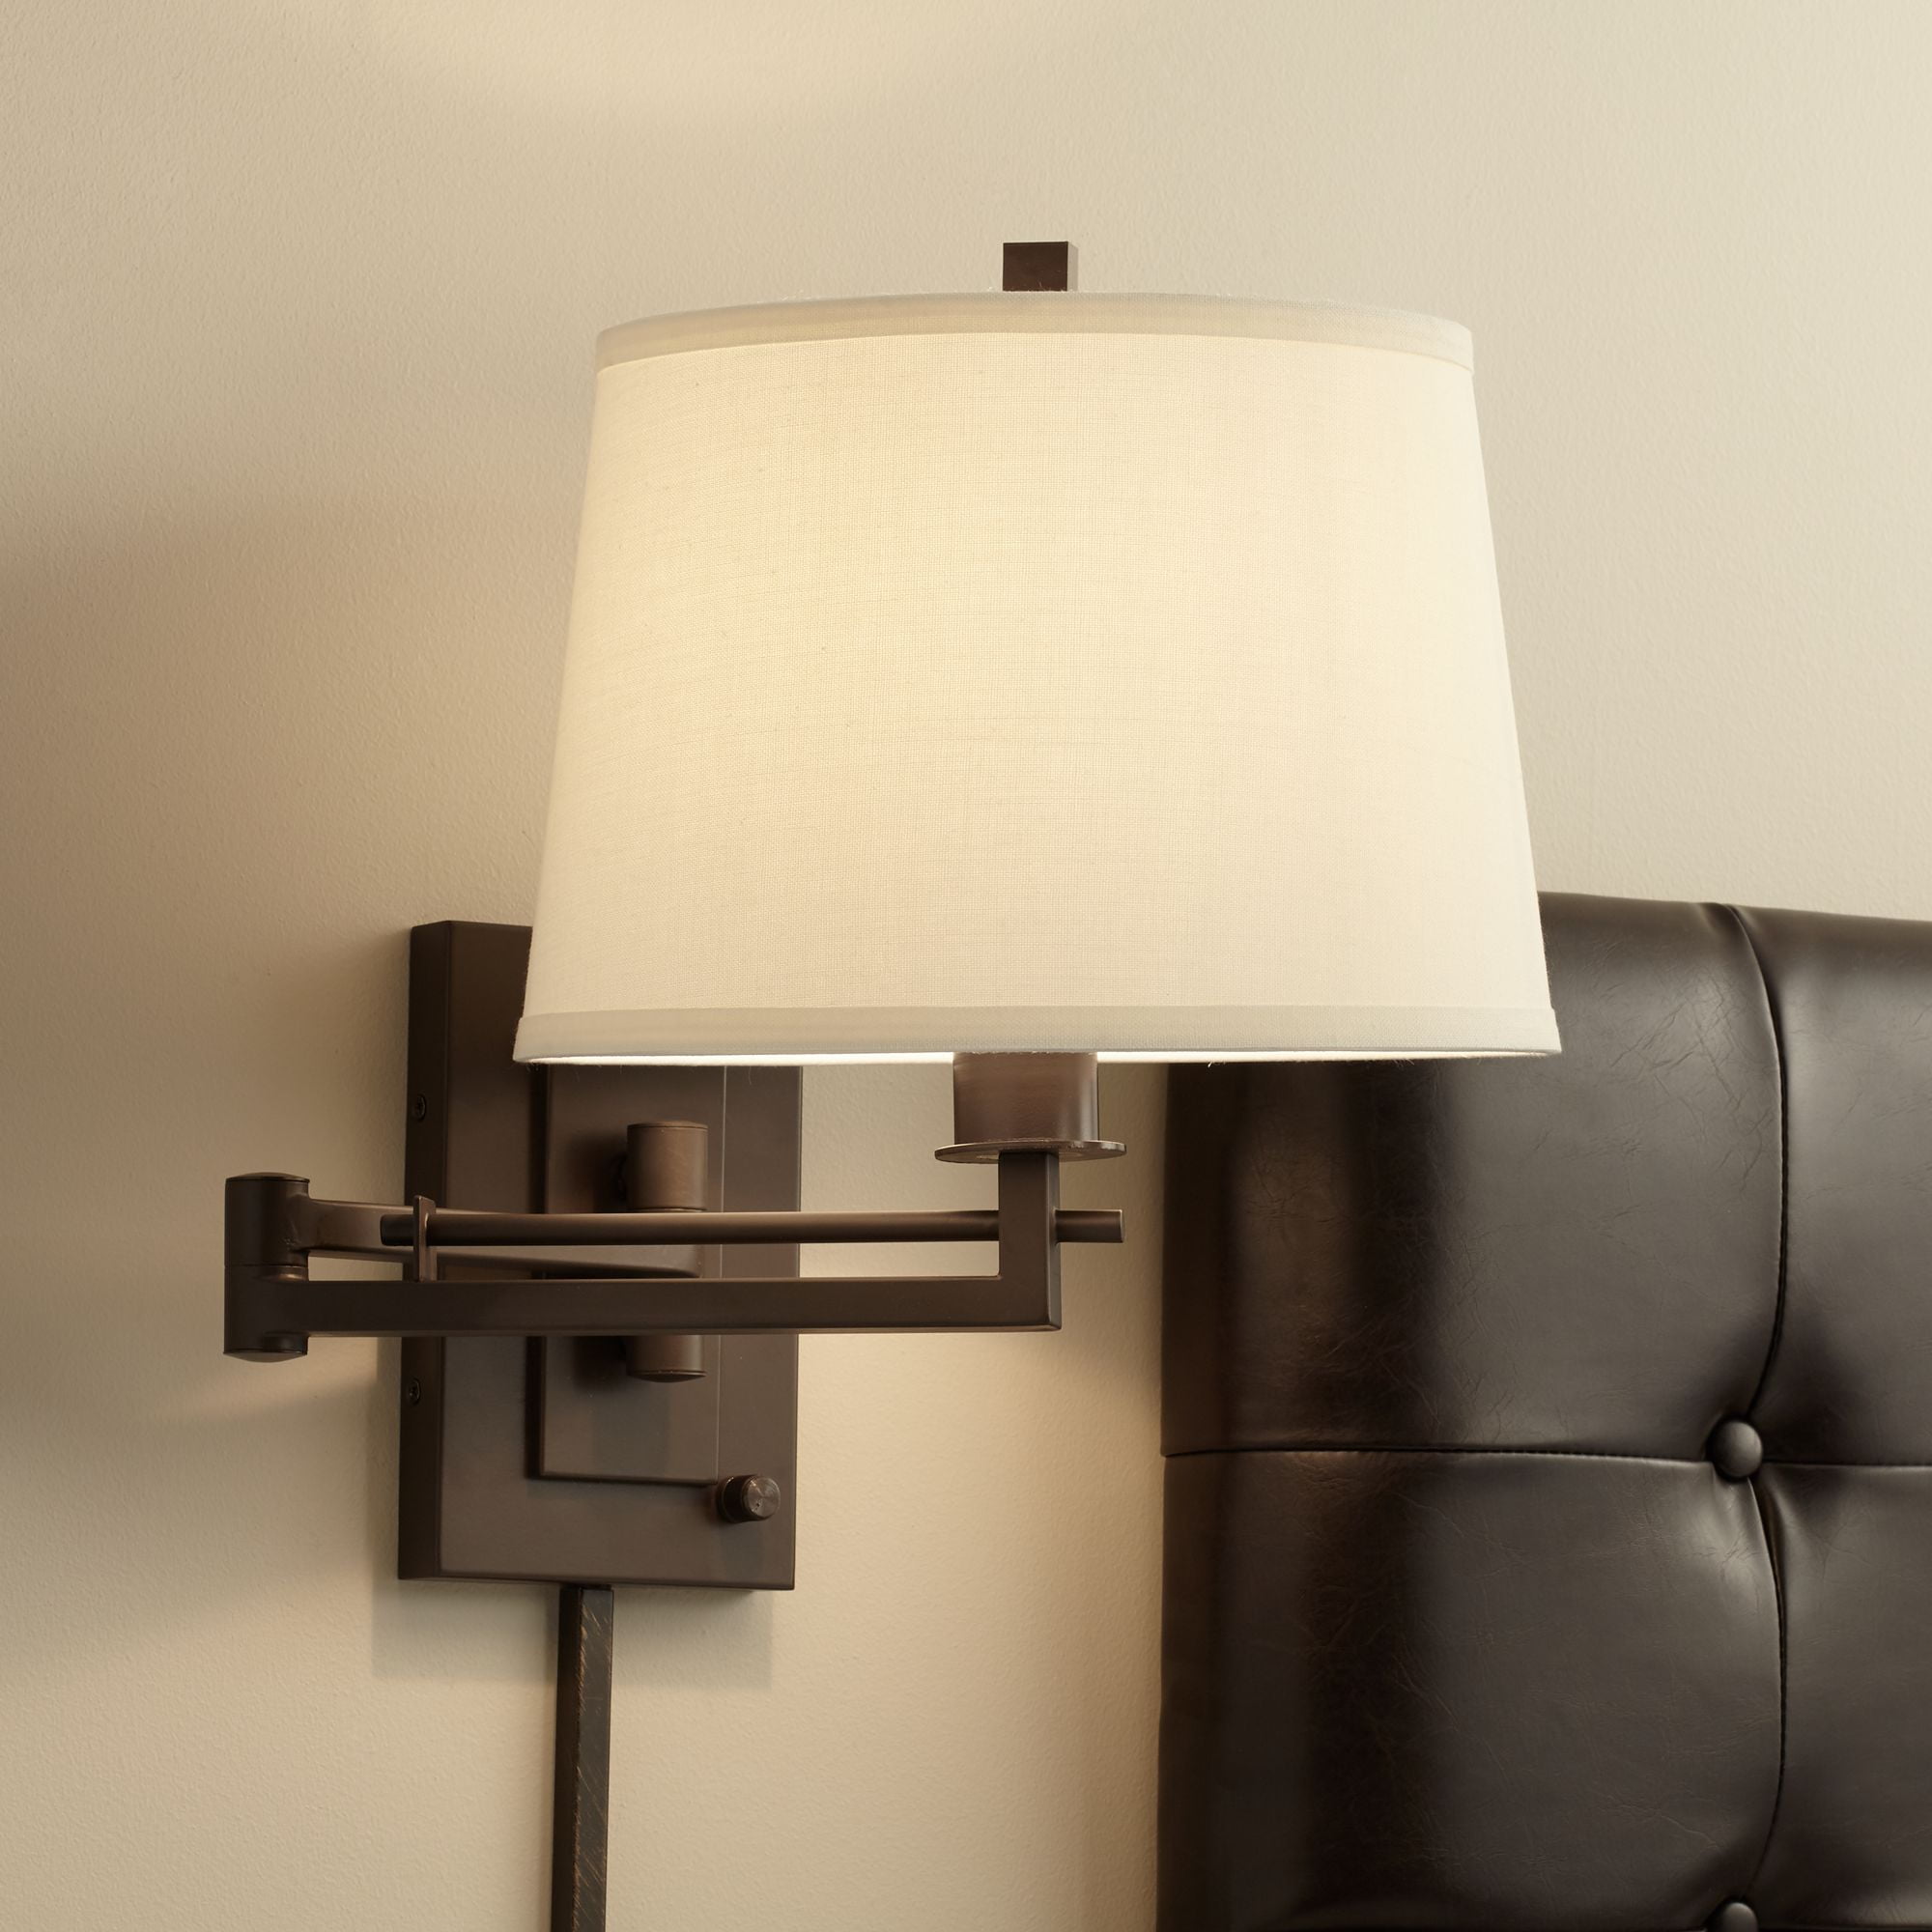 arm lamps Swinging wall